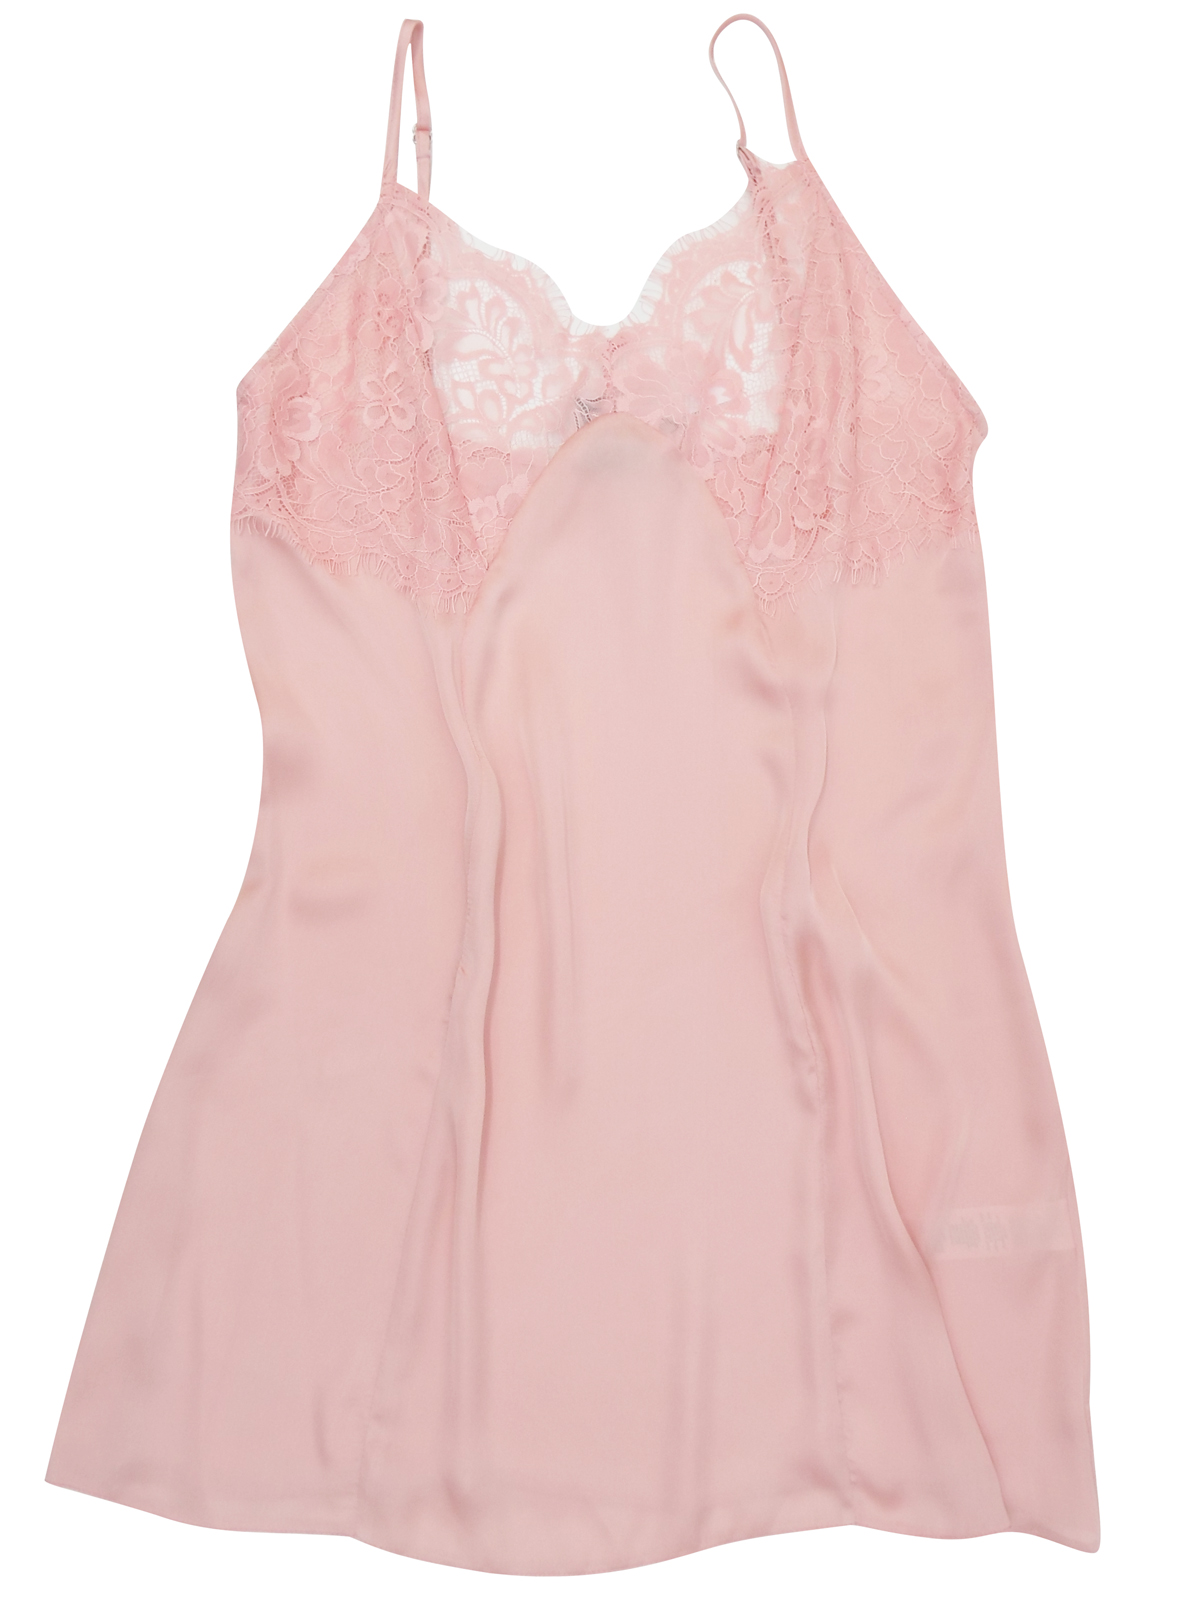 ASOS PALE-PINK Eliza Delicate Lace Satin Chemise - Size 4 to 18